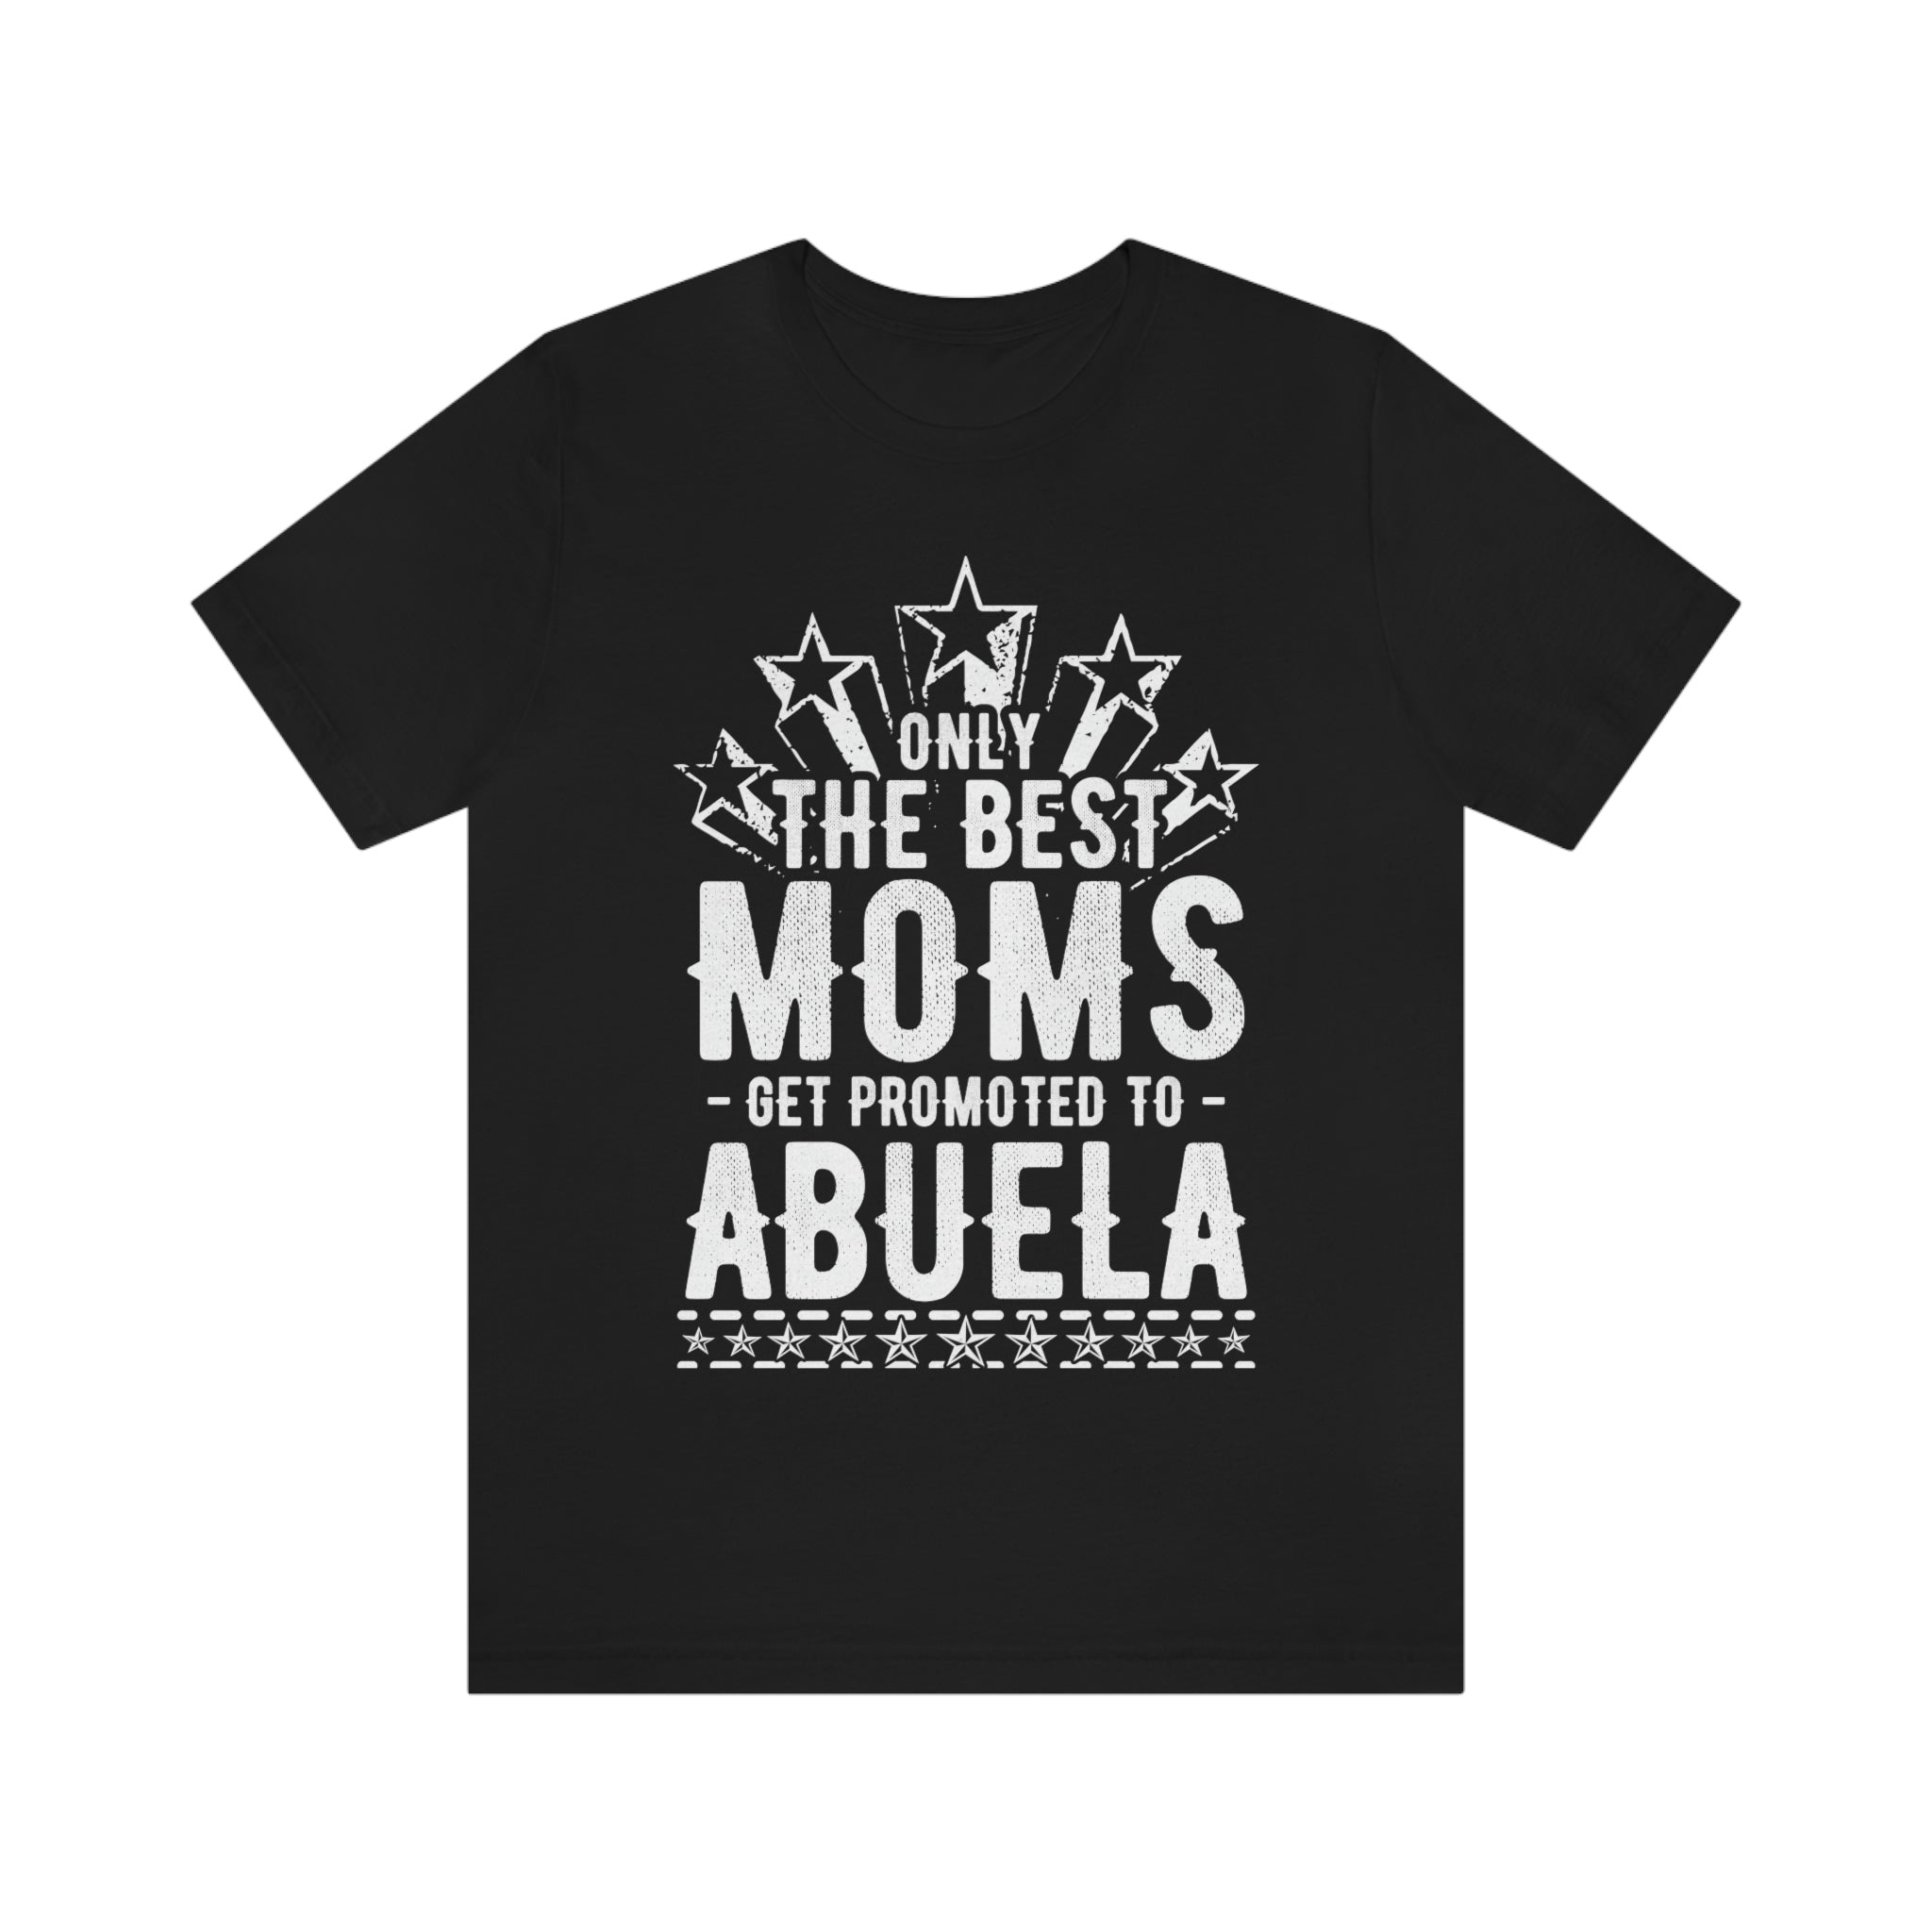 Black t-shirt for women with text "Only the best moms get promoted to abuela" and shooting stars as part of the design